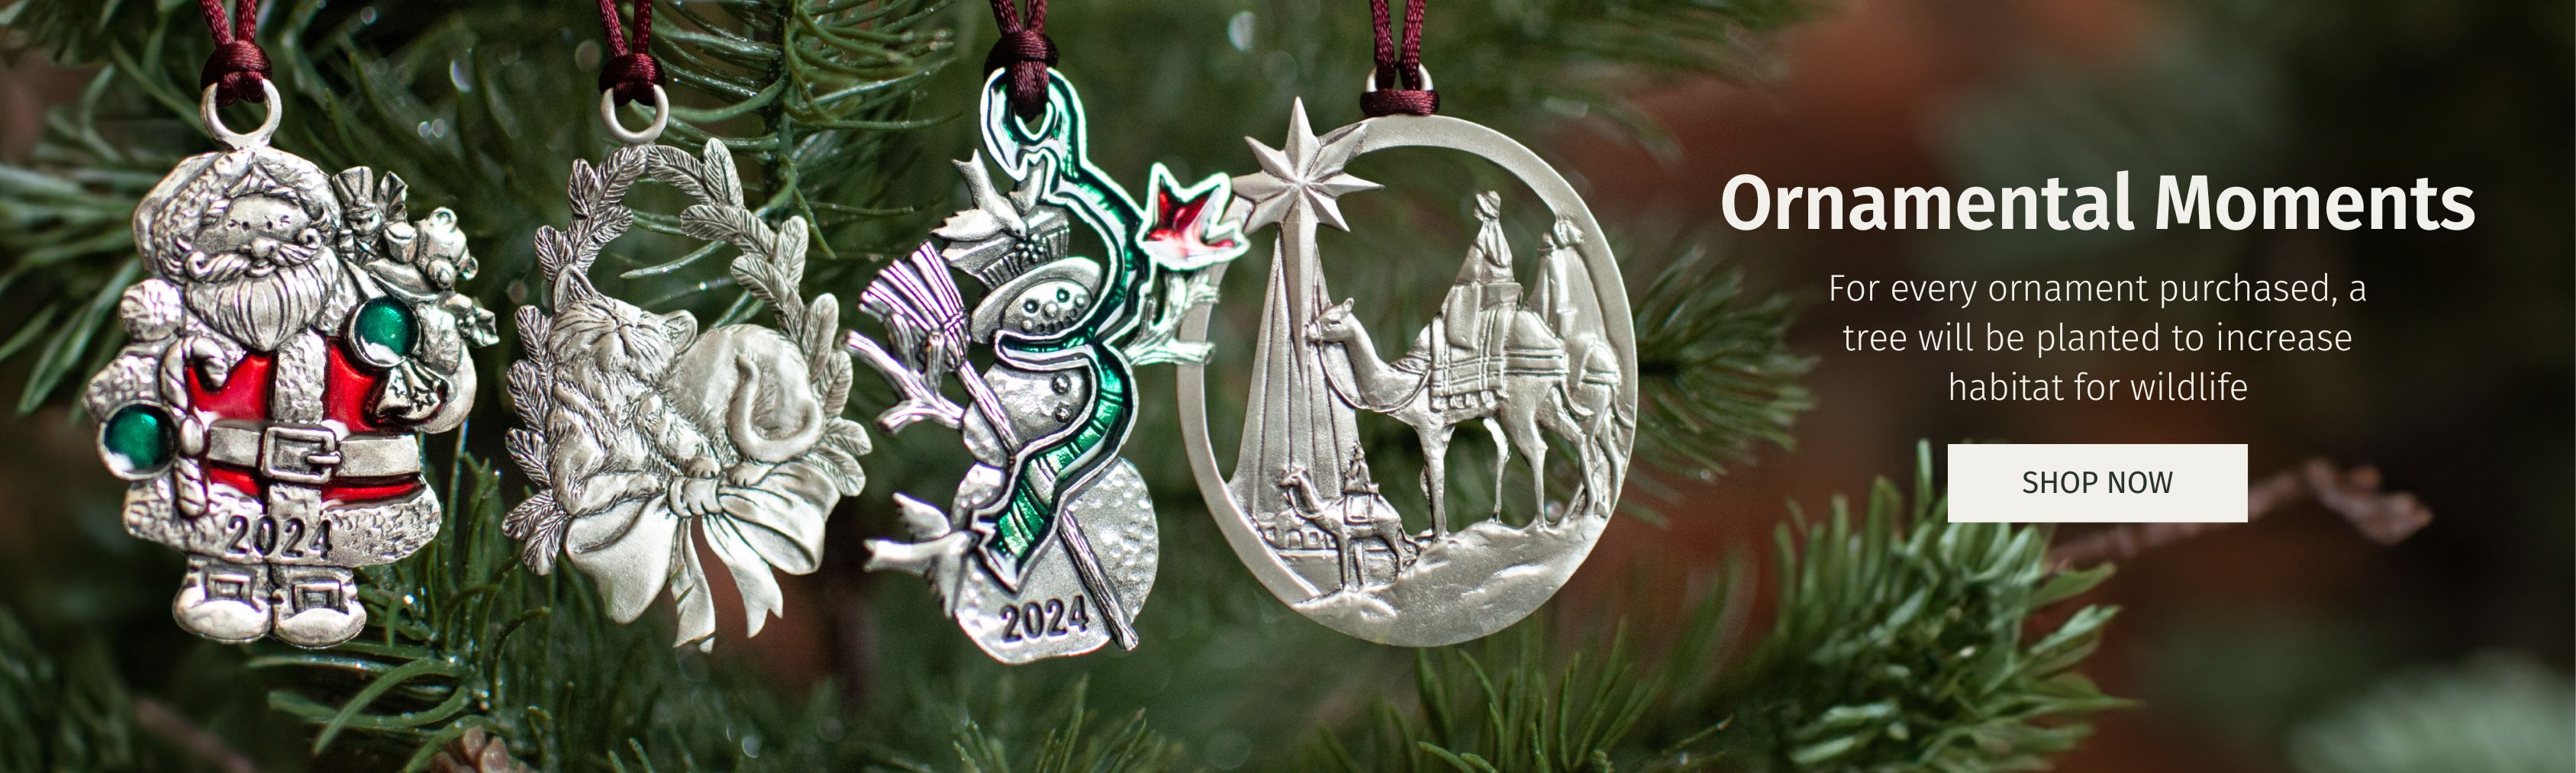 ornaments that plant a tree!